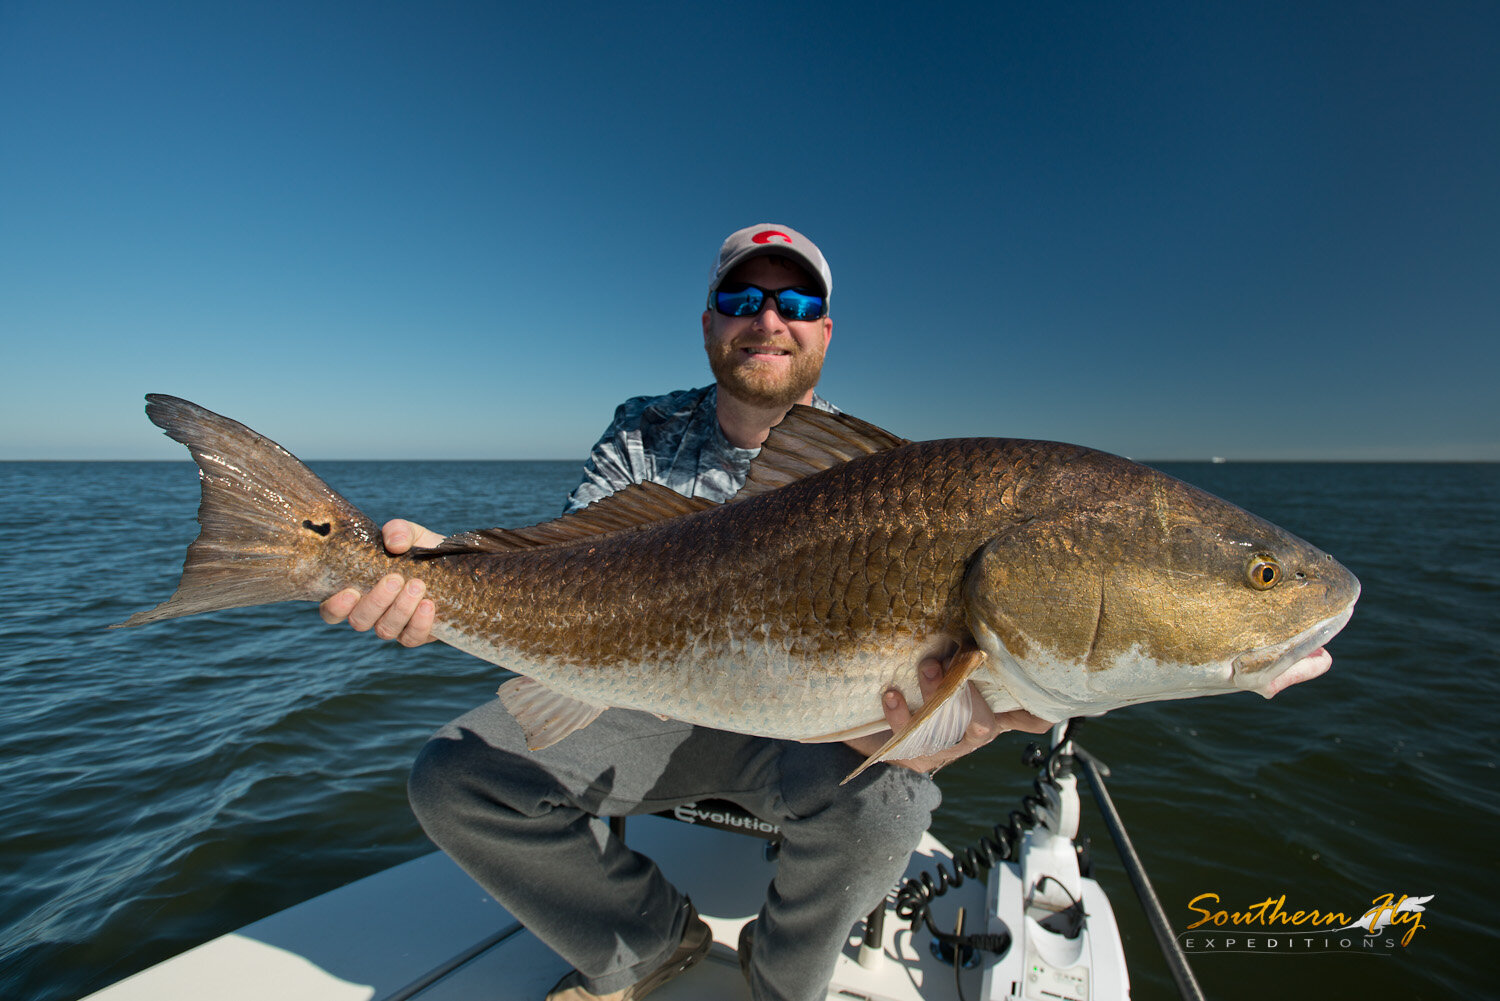 2019-12-15_SouthernFlyExpeditions_NewOrleans_StephenPadgettAndJimmyWise-3.jpg